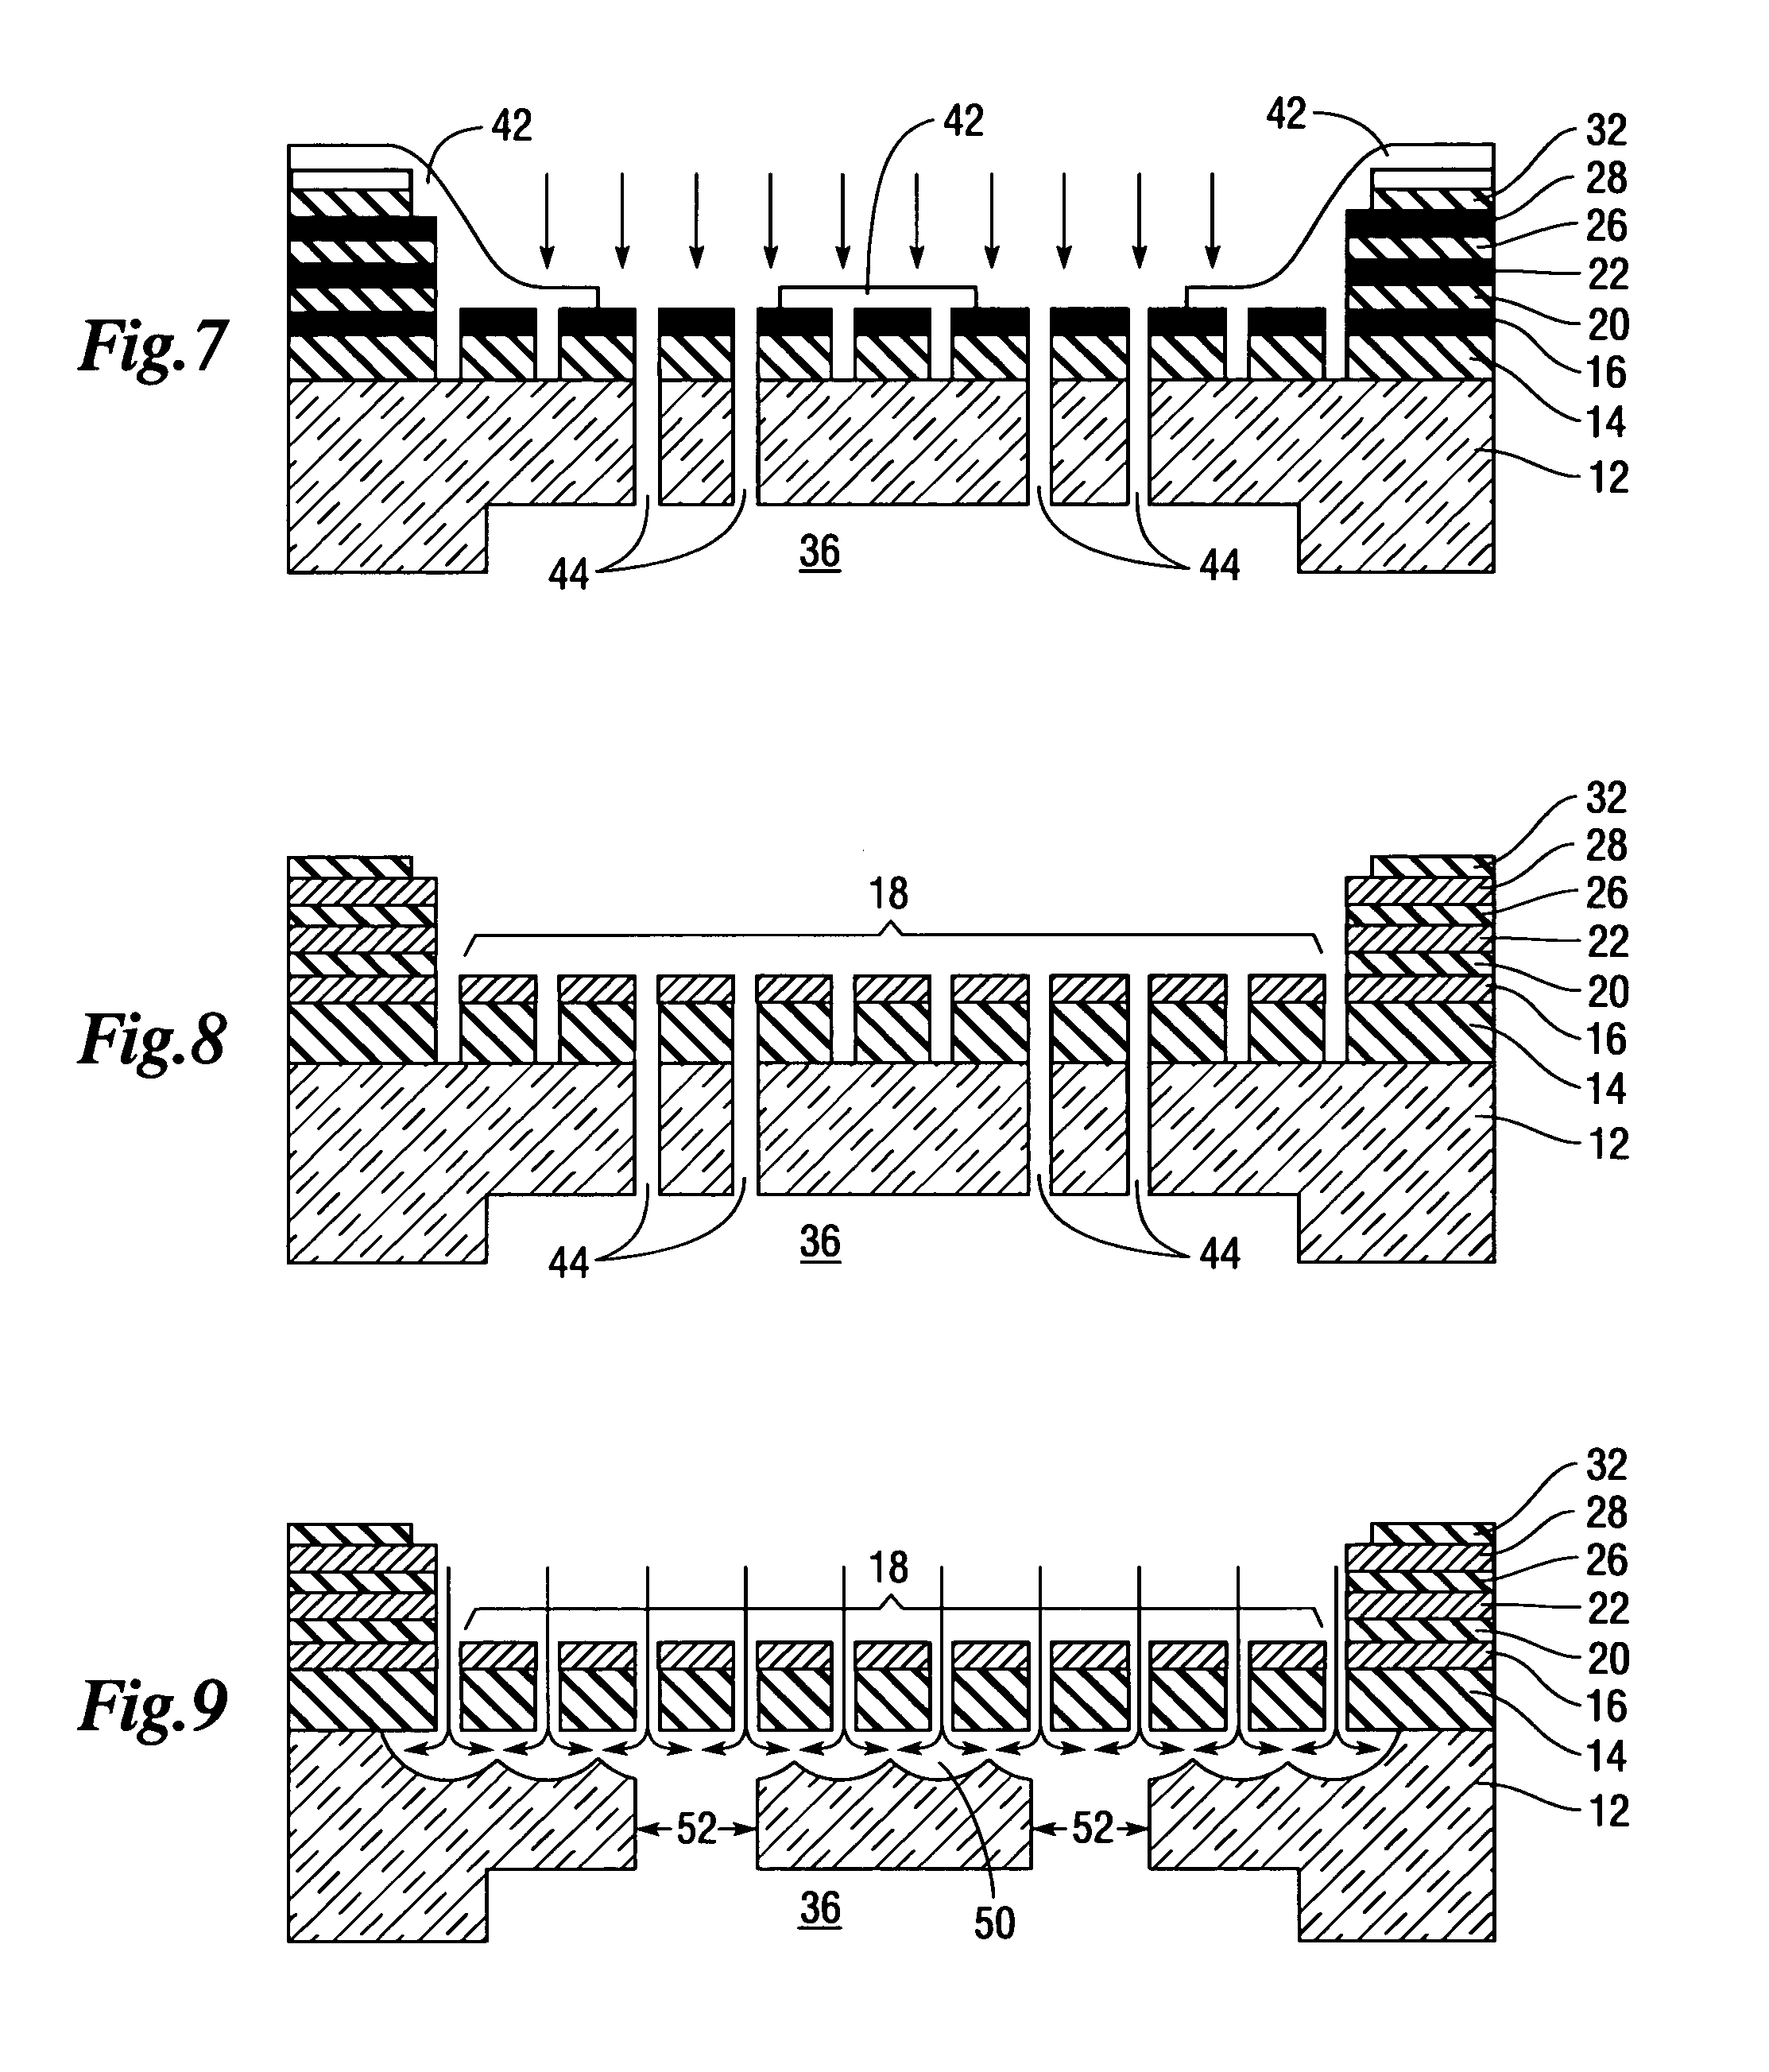 Process for forming and acoustically connecting structures on a substrate